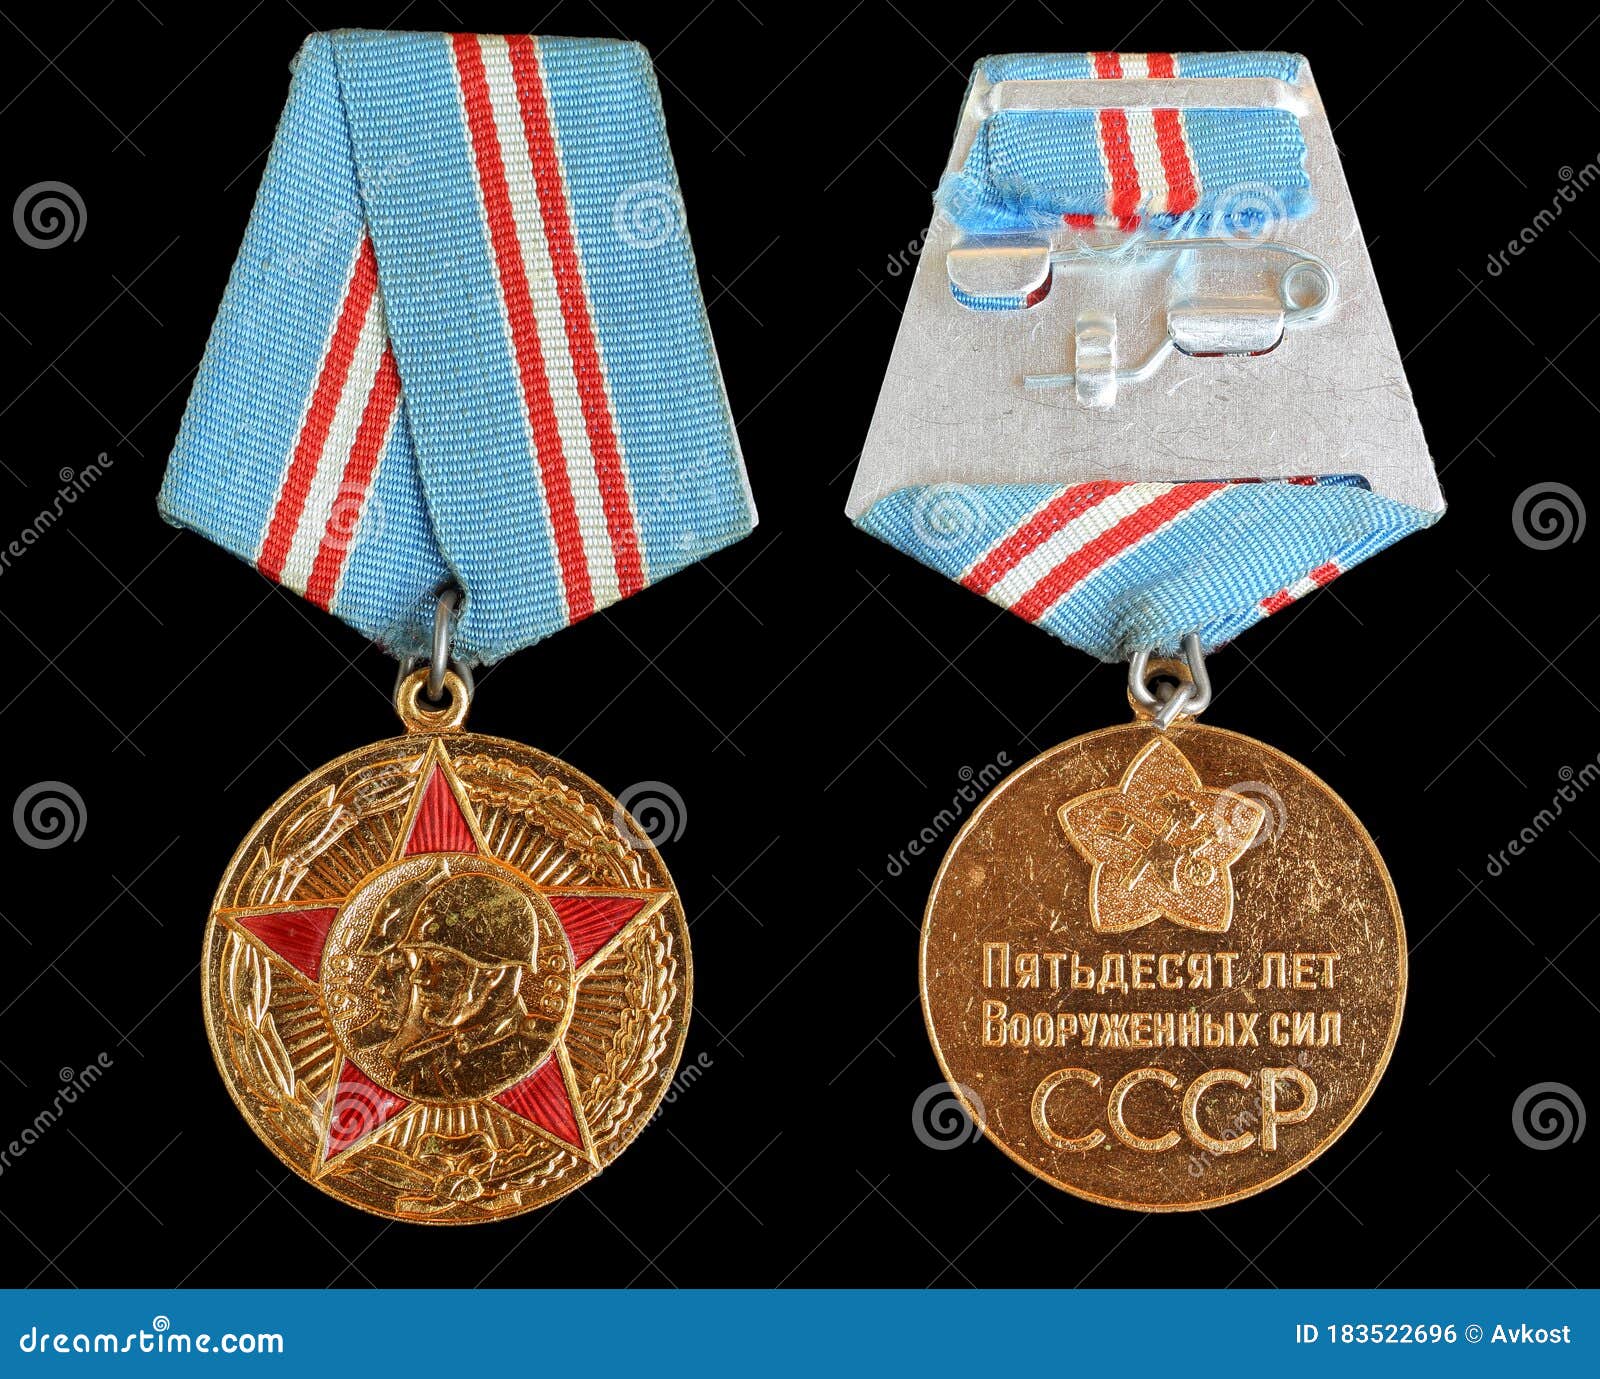 Jubilee medal Armed forces USSR Russia Soviet Union 1978 Money Coin Vintage